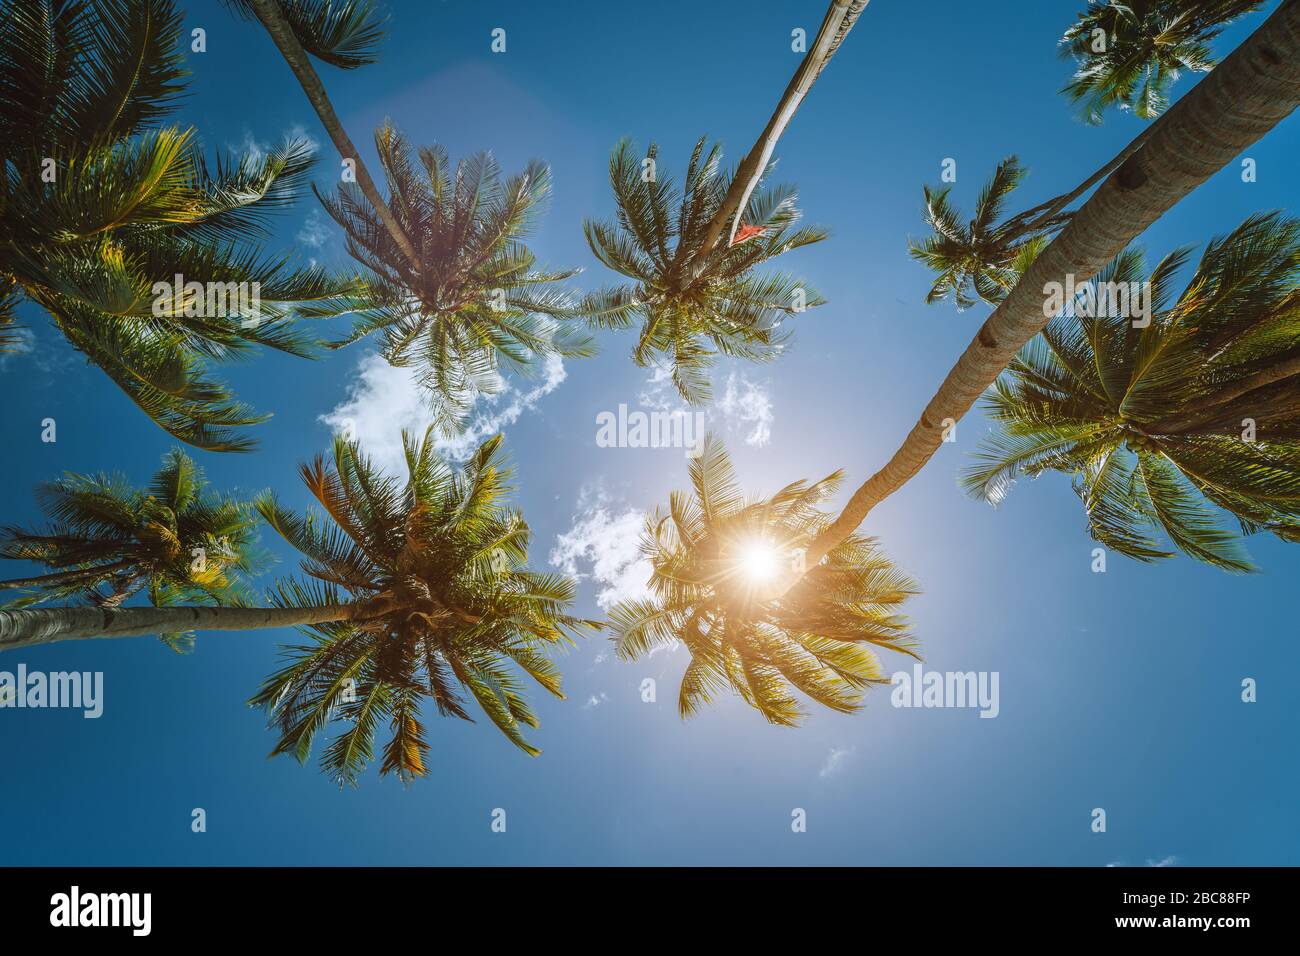 Coconut palm trees tops with sun shining through leaves, view from below. Getaway summer travel concept. Stock Photo